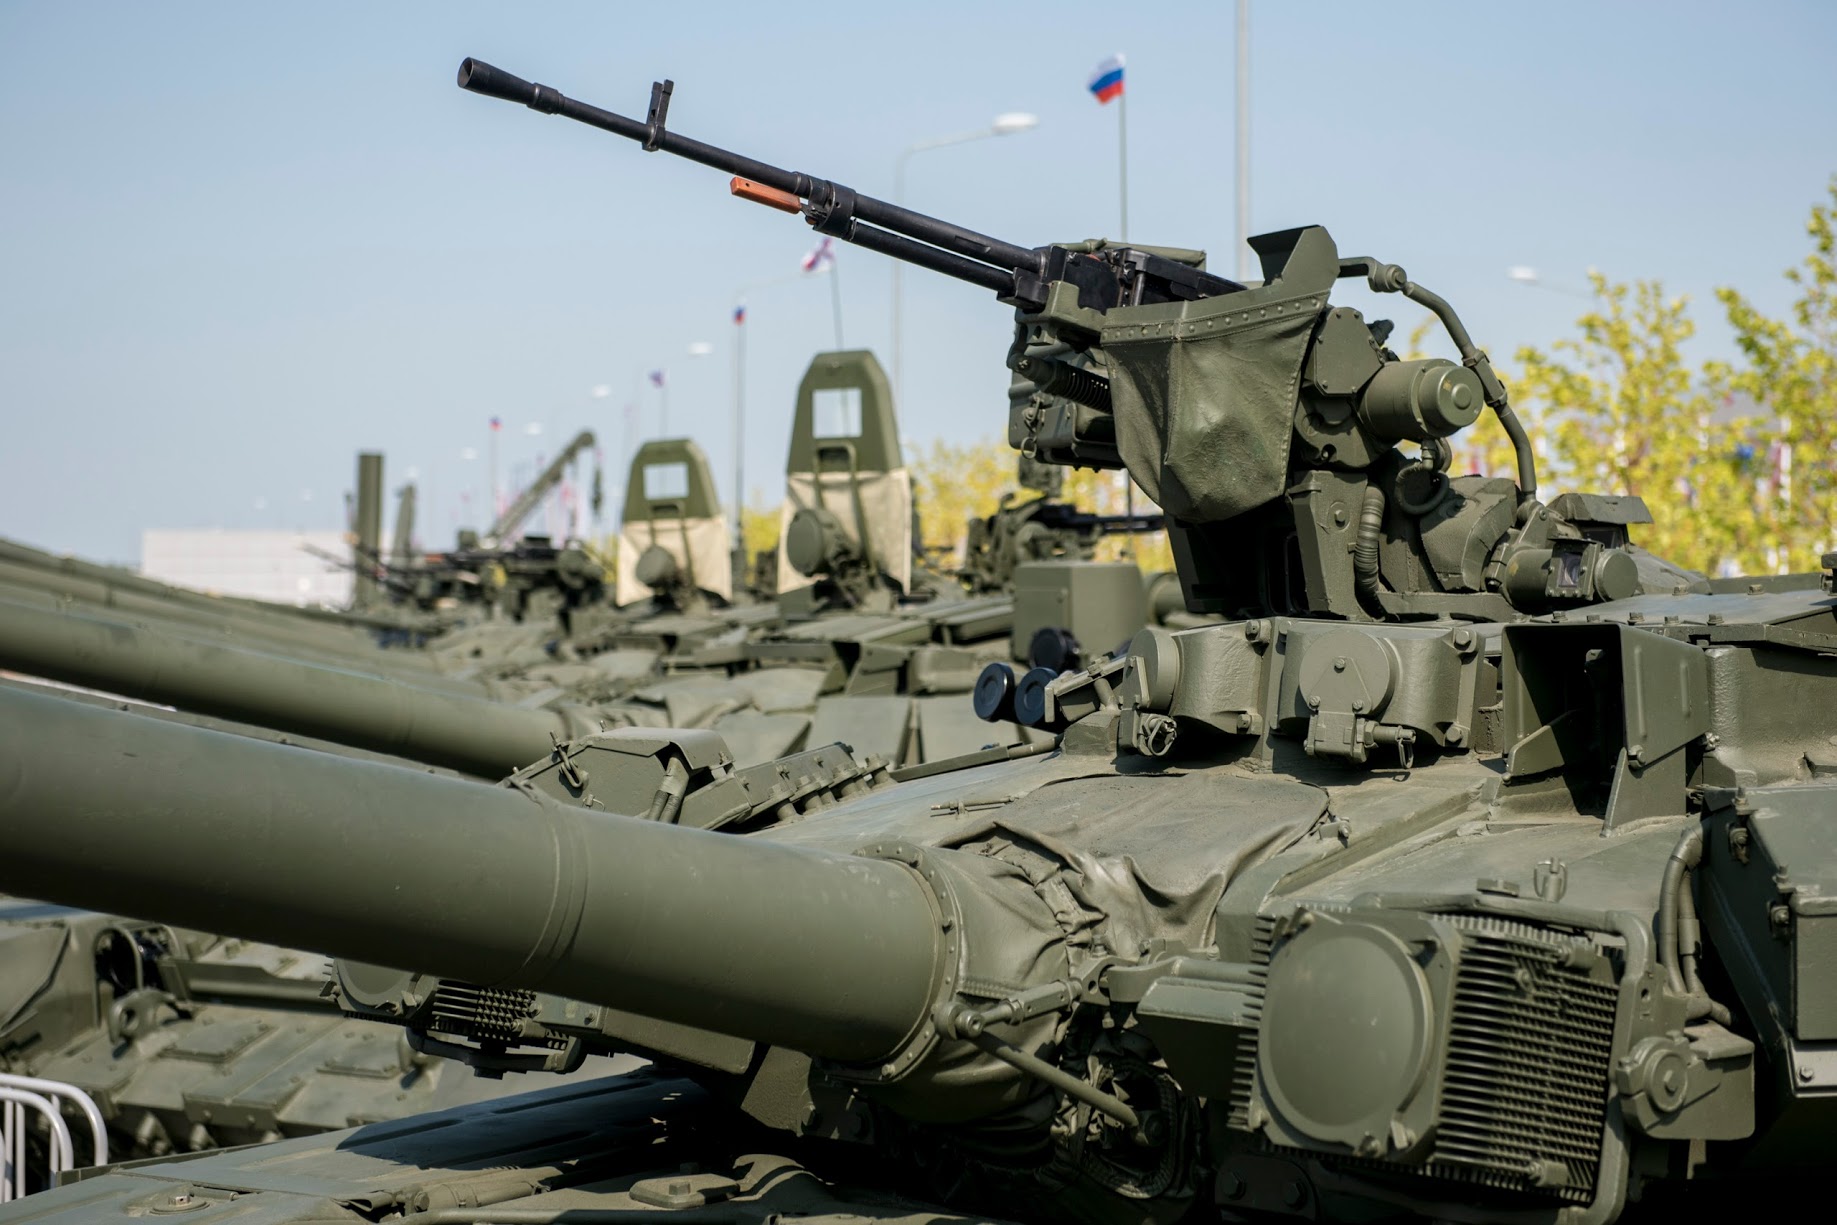 Rosoboronexport: Artillery to Play Bigger Part in Local Conflicts